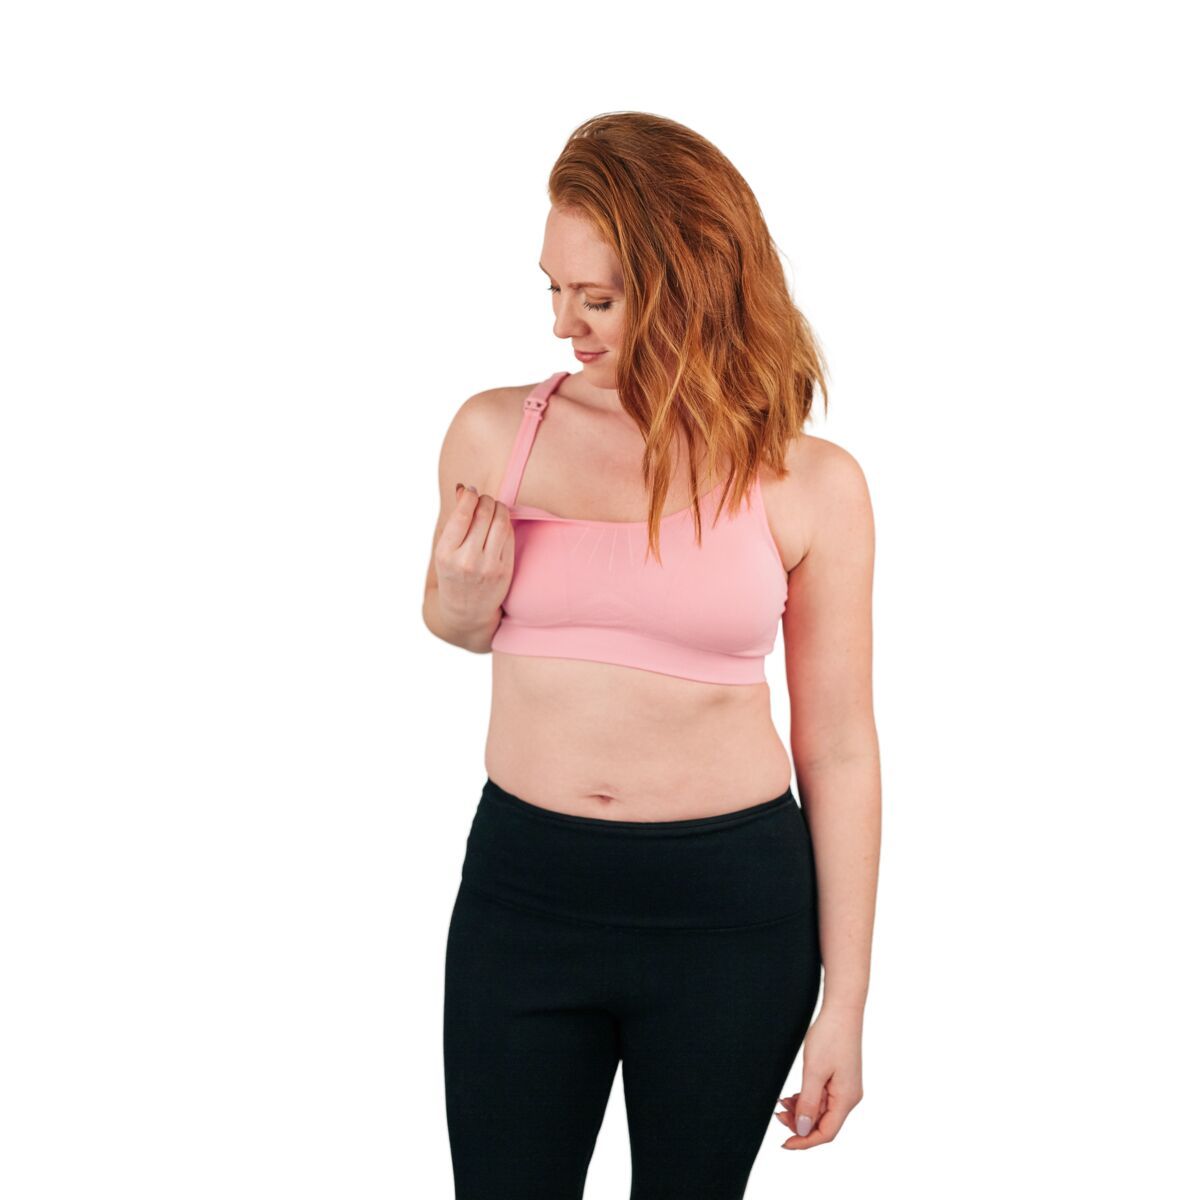 Jubralee sports bra, Moving Comfort ----supposed to be good for  breastfeeding and working out (has velcro straps)